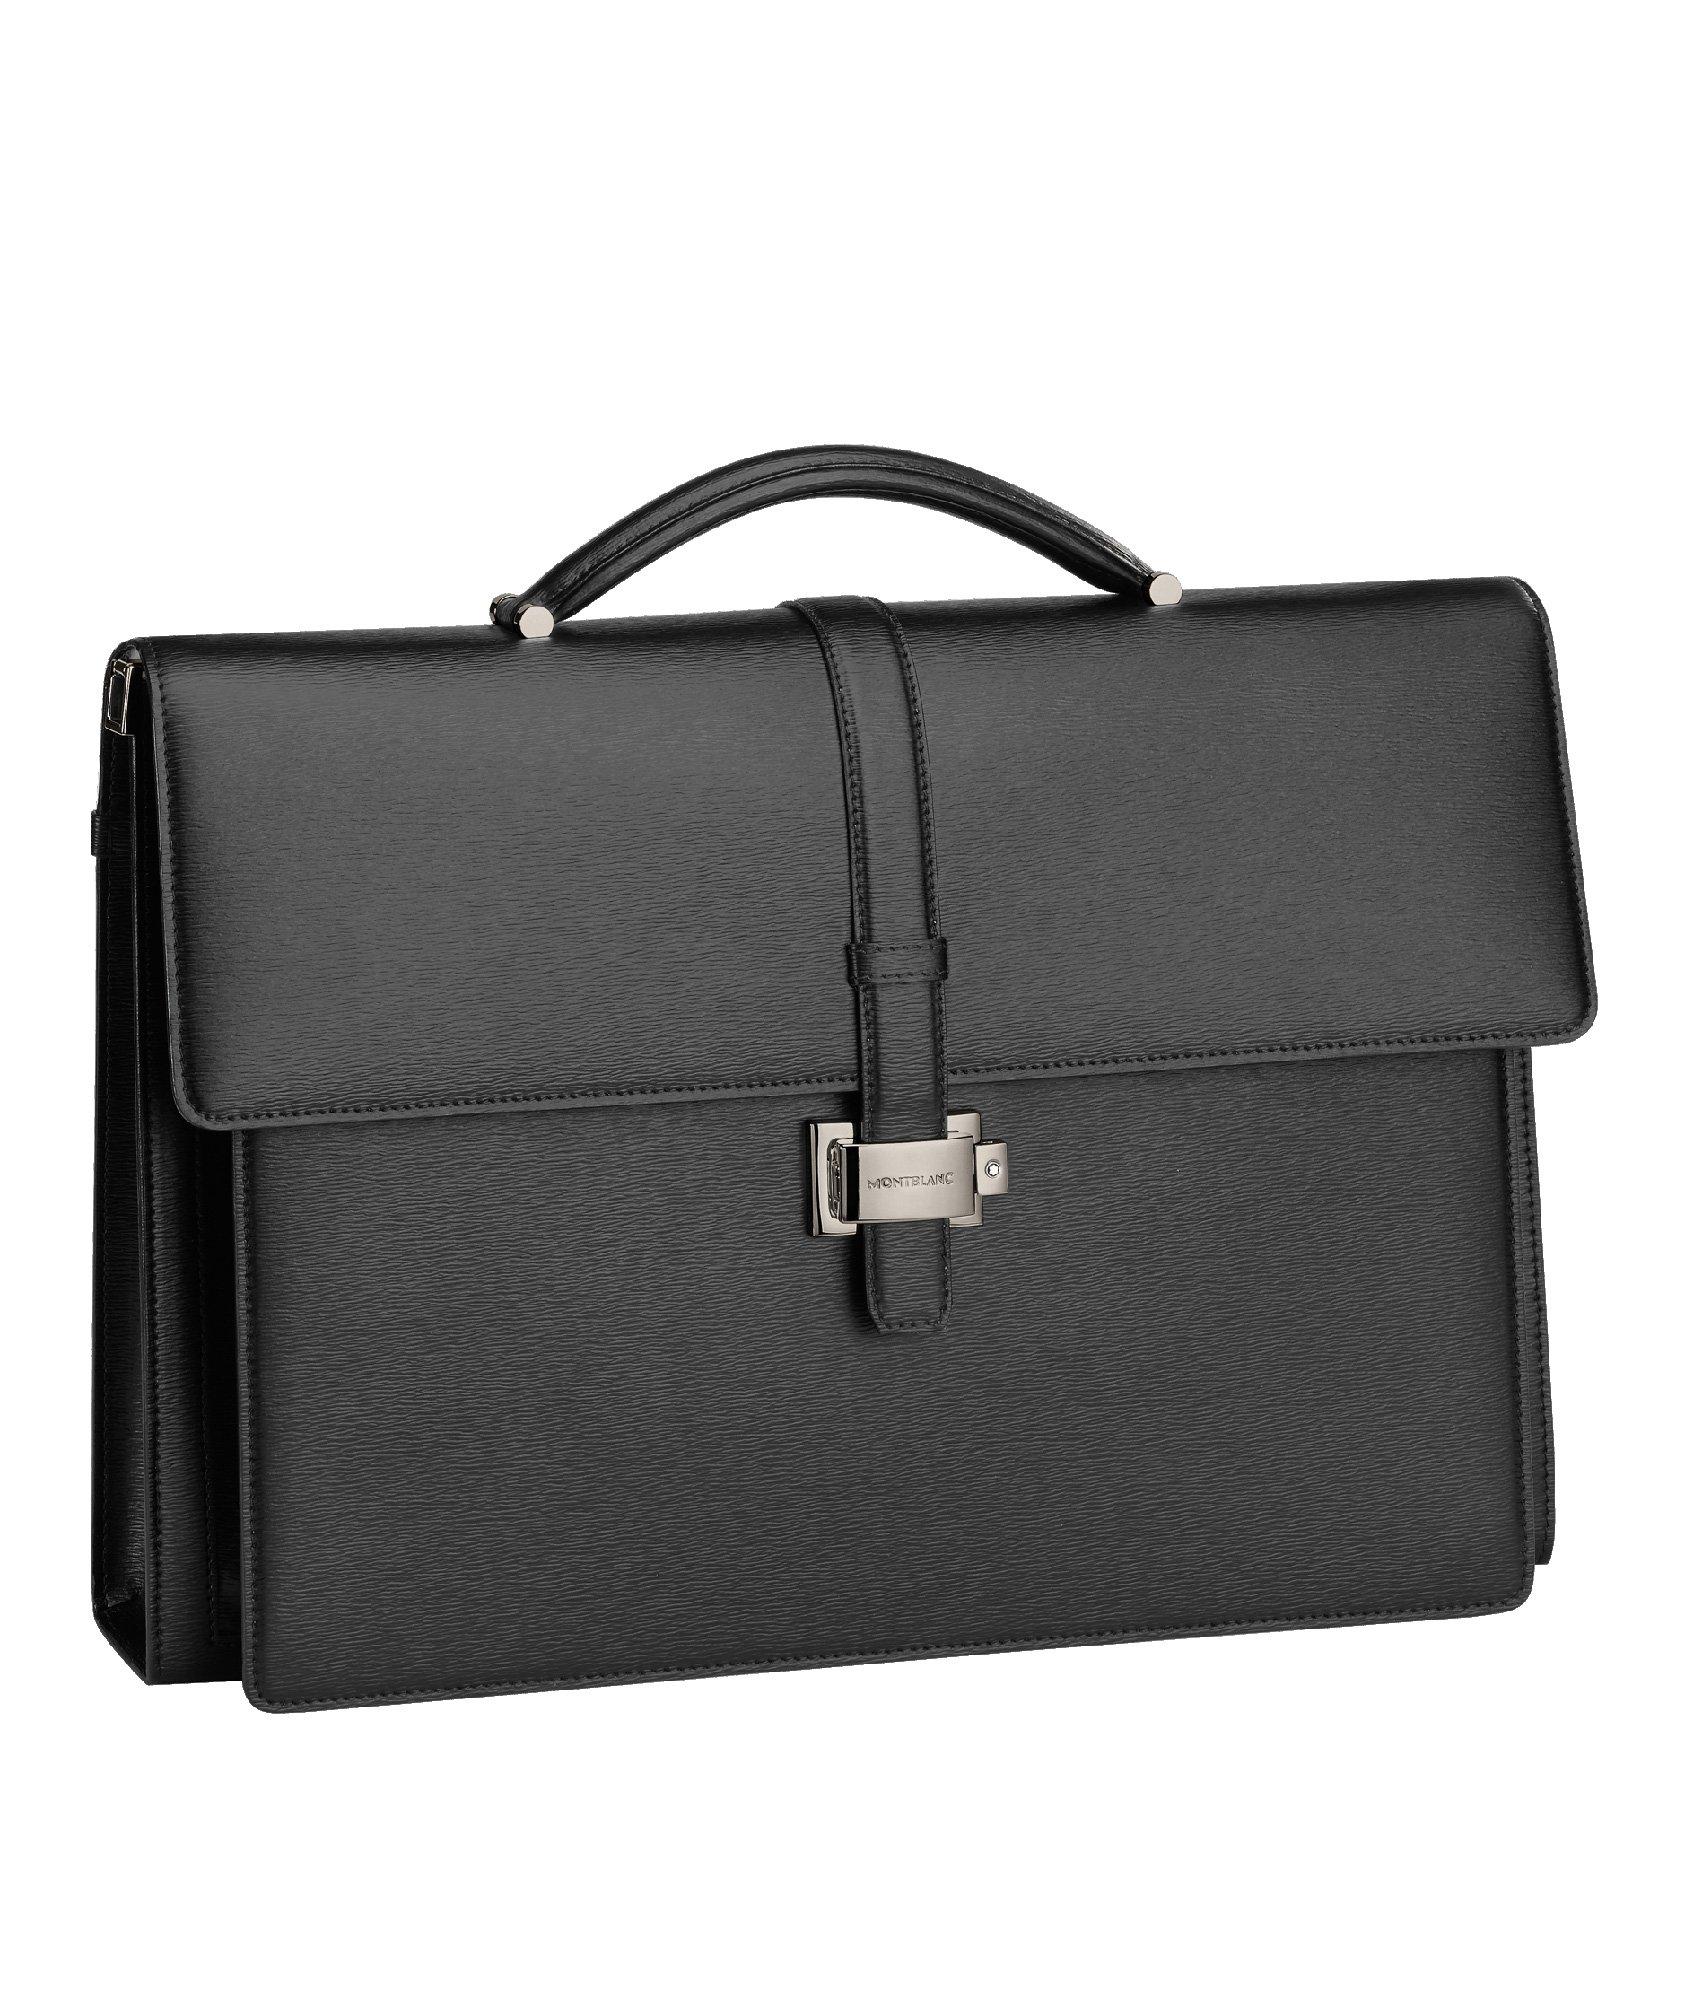 Westside Double Gusset Briefcase image 0